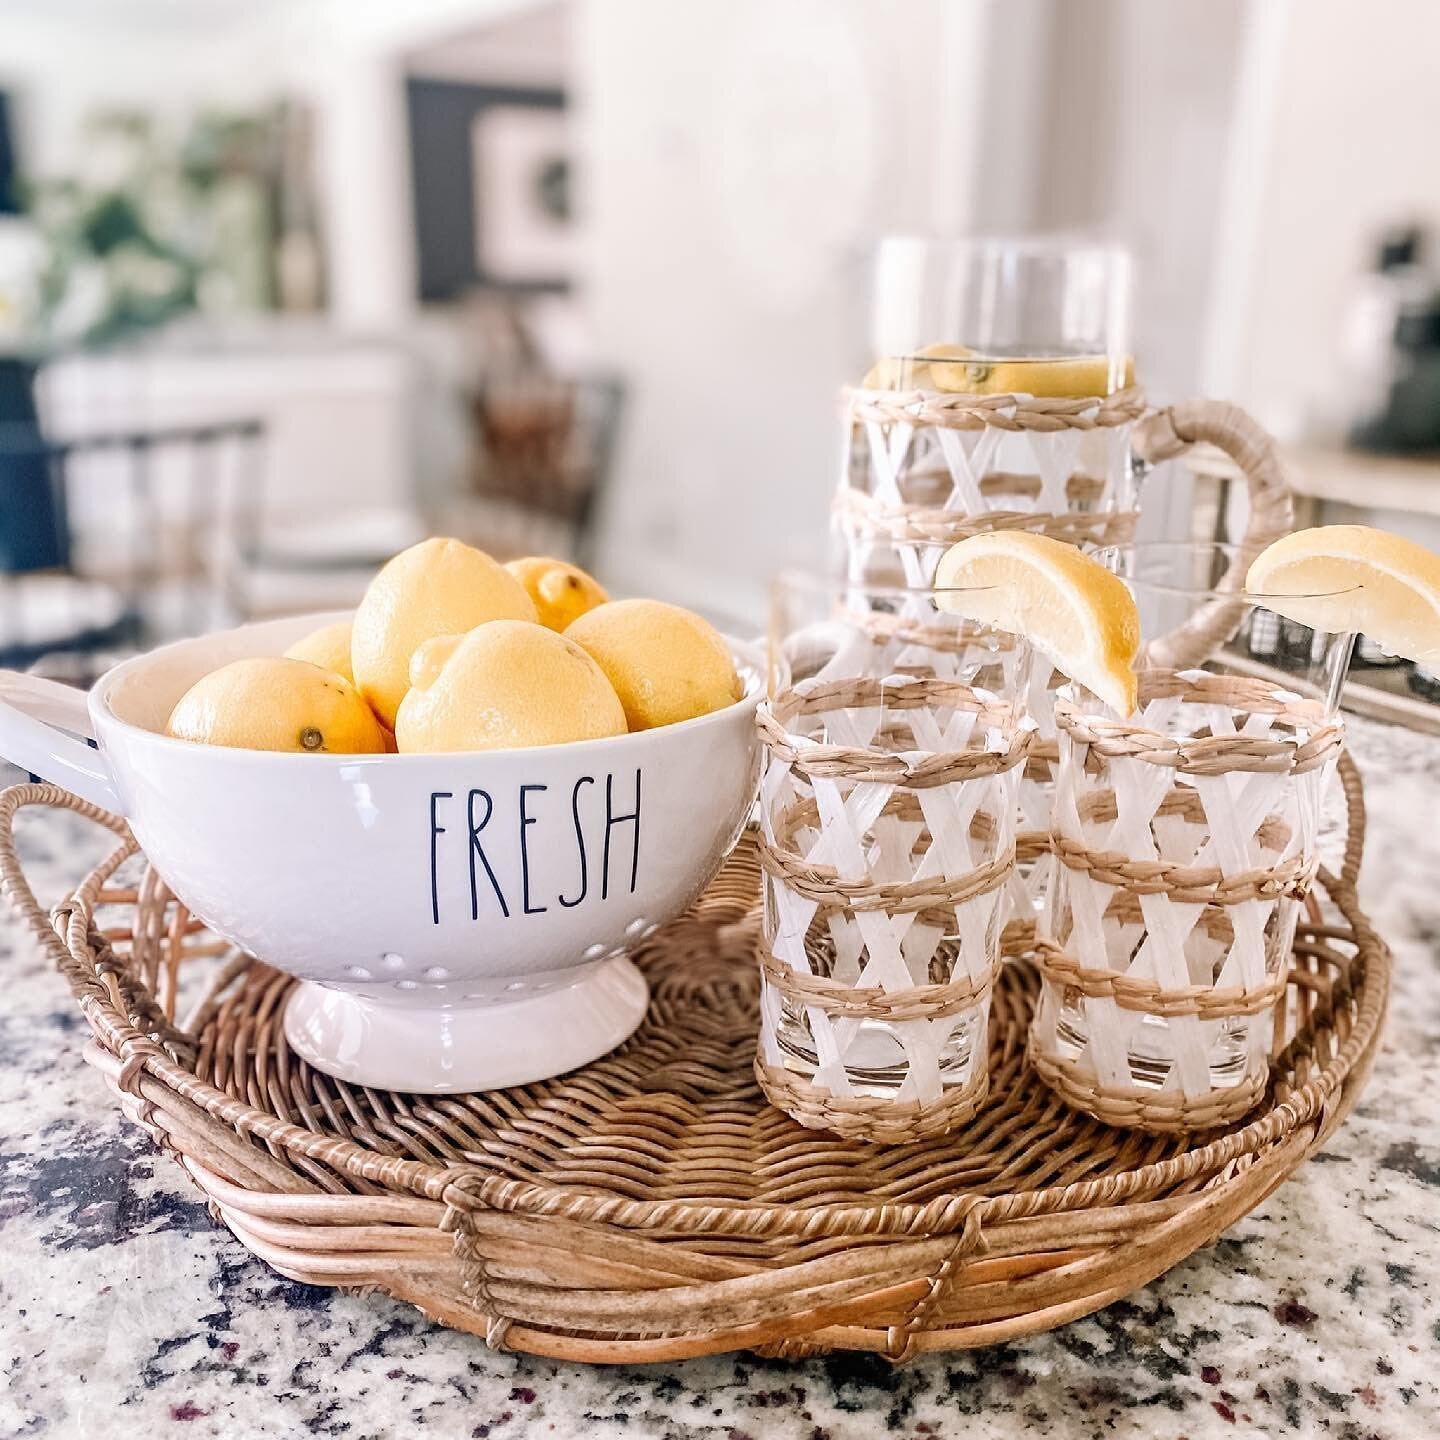 Talk about a fresh, clean look for summer! 😍 Wishing we were sitting poolside with a cold glass of lemonade today. Thanks for the inspo, @sweethomevalley! ✨	
.
Seagrass Overlay Tumblers item no. 240876
Seagrass Overlay Pitcher item no. 240163
#kirkl